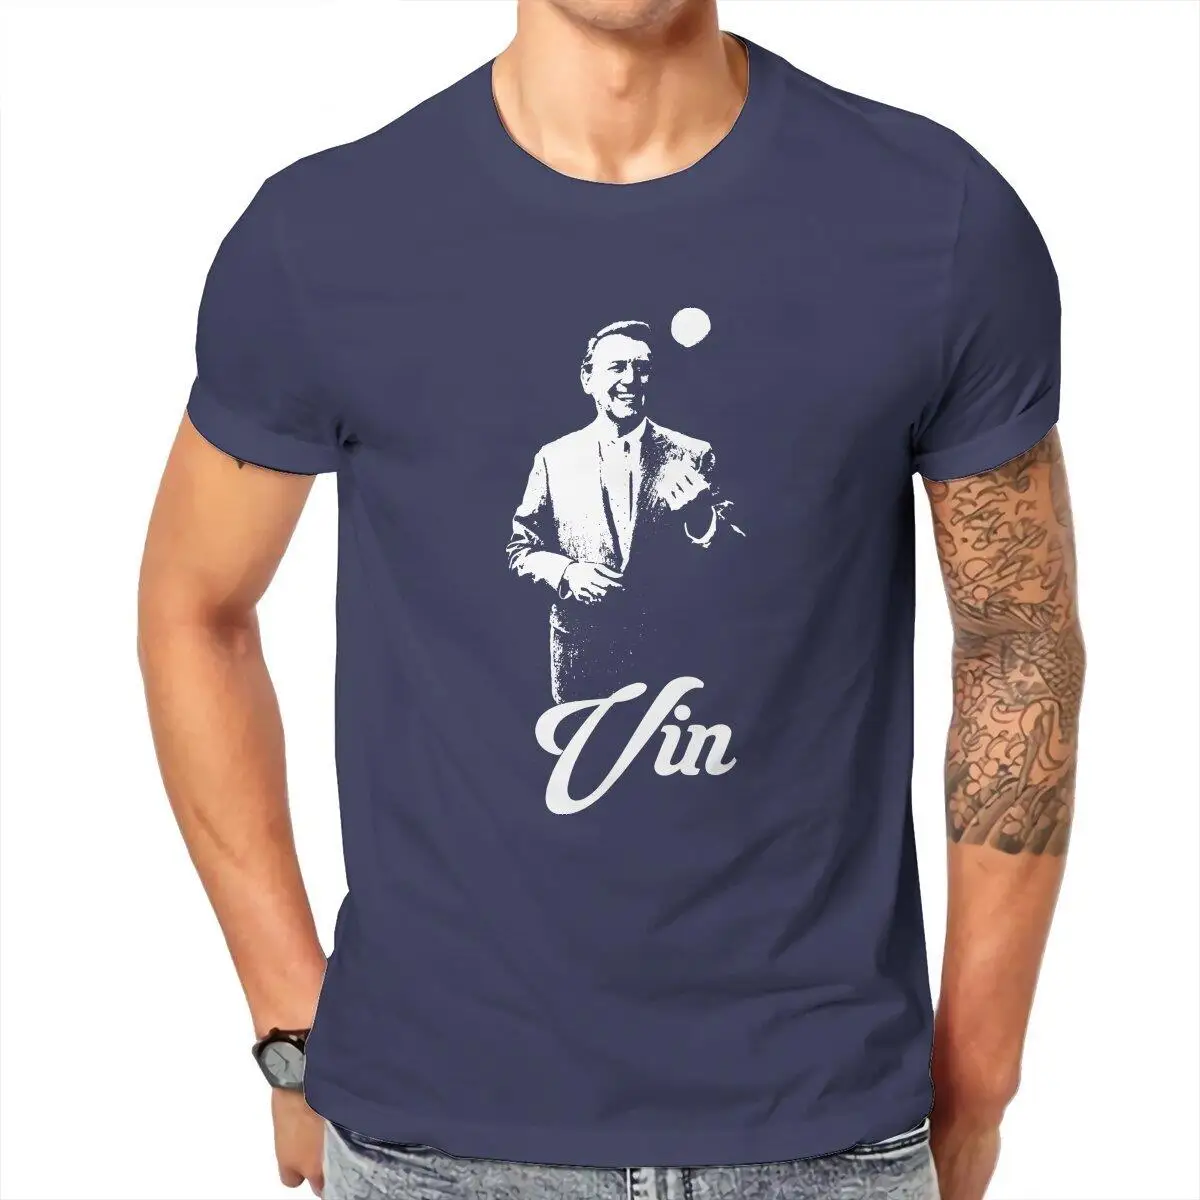 Leisure Vin Scully The Voice Of LA  T-Shirts for Men Crew Neck Cotton T Shirts  Short Sleeve Tees New Arrival Tops